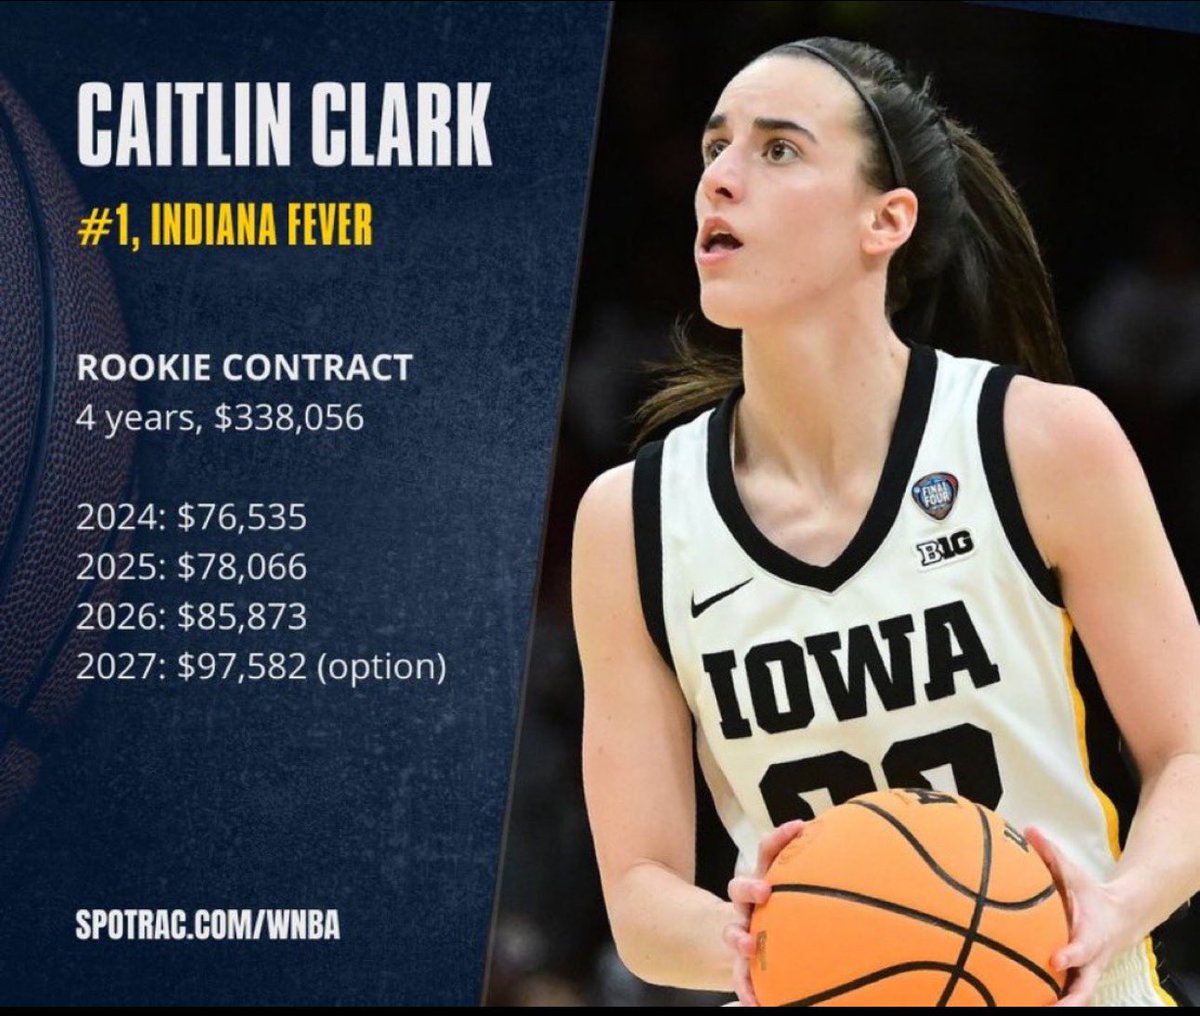 What a total rip-off @WNBA Clark is going to make the league hundreds of millions